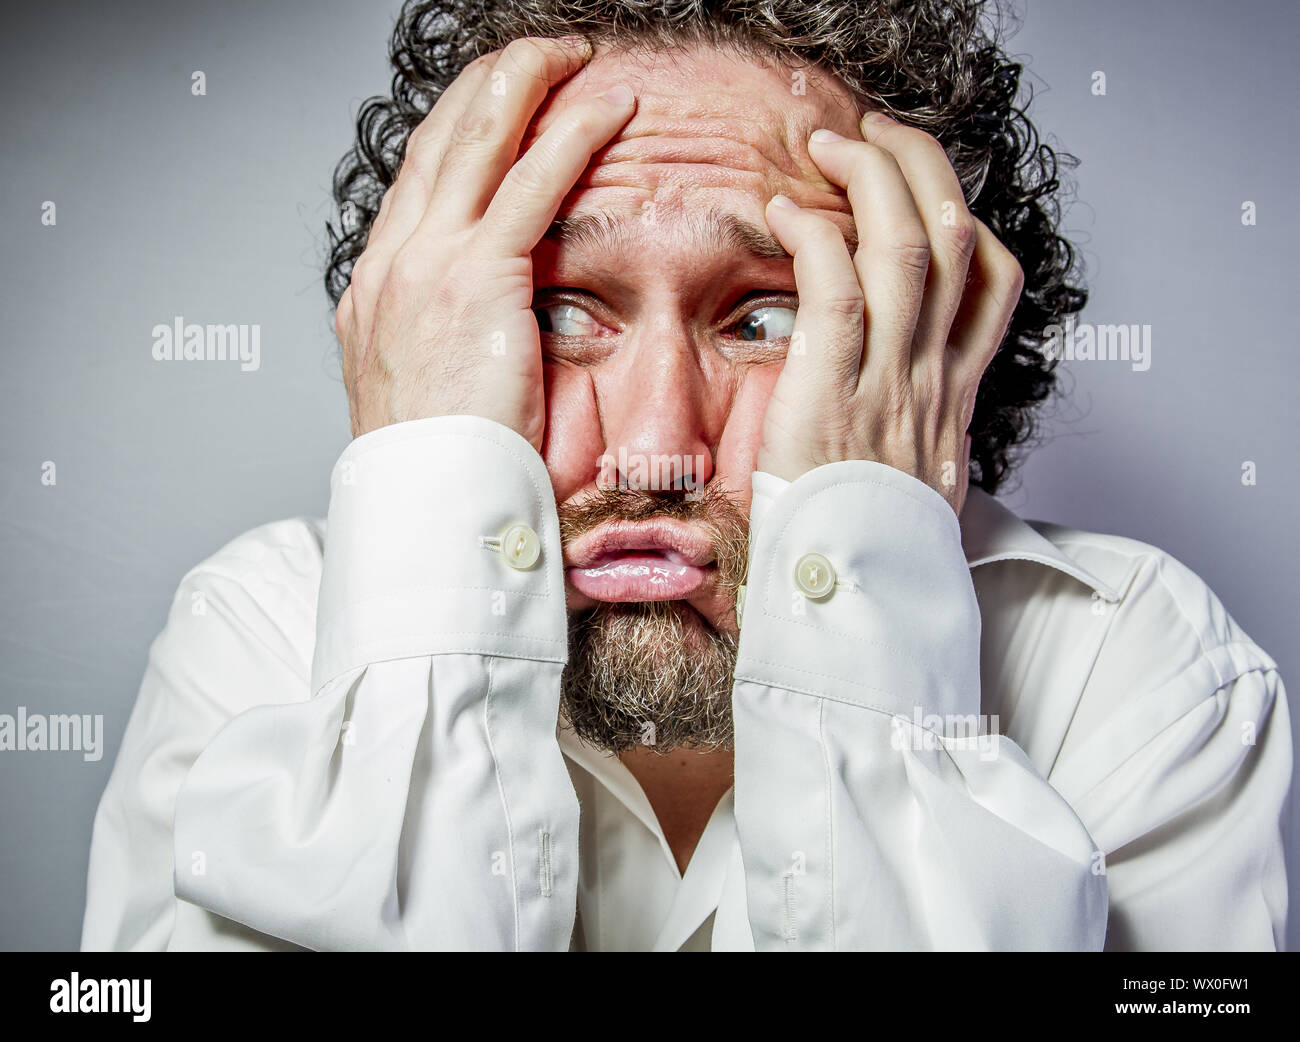 imagination and madness, man with intense expression, white shirt Stock Photo